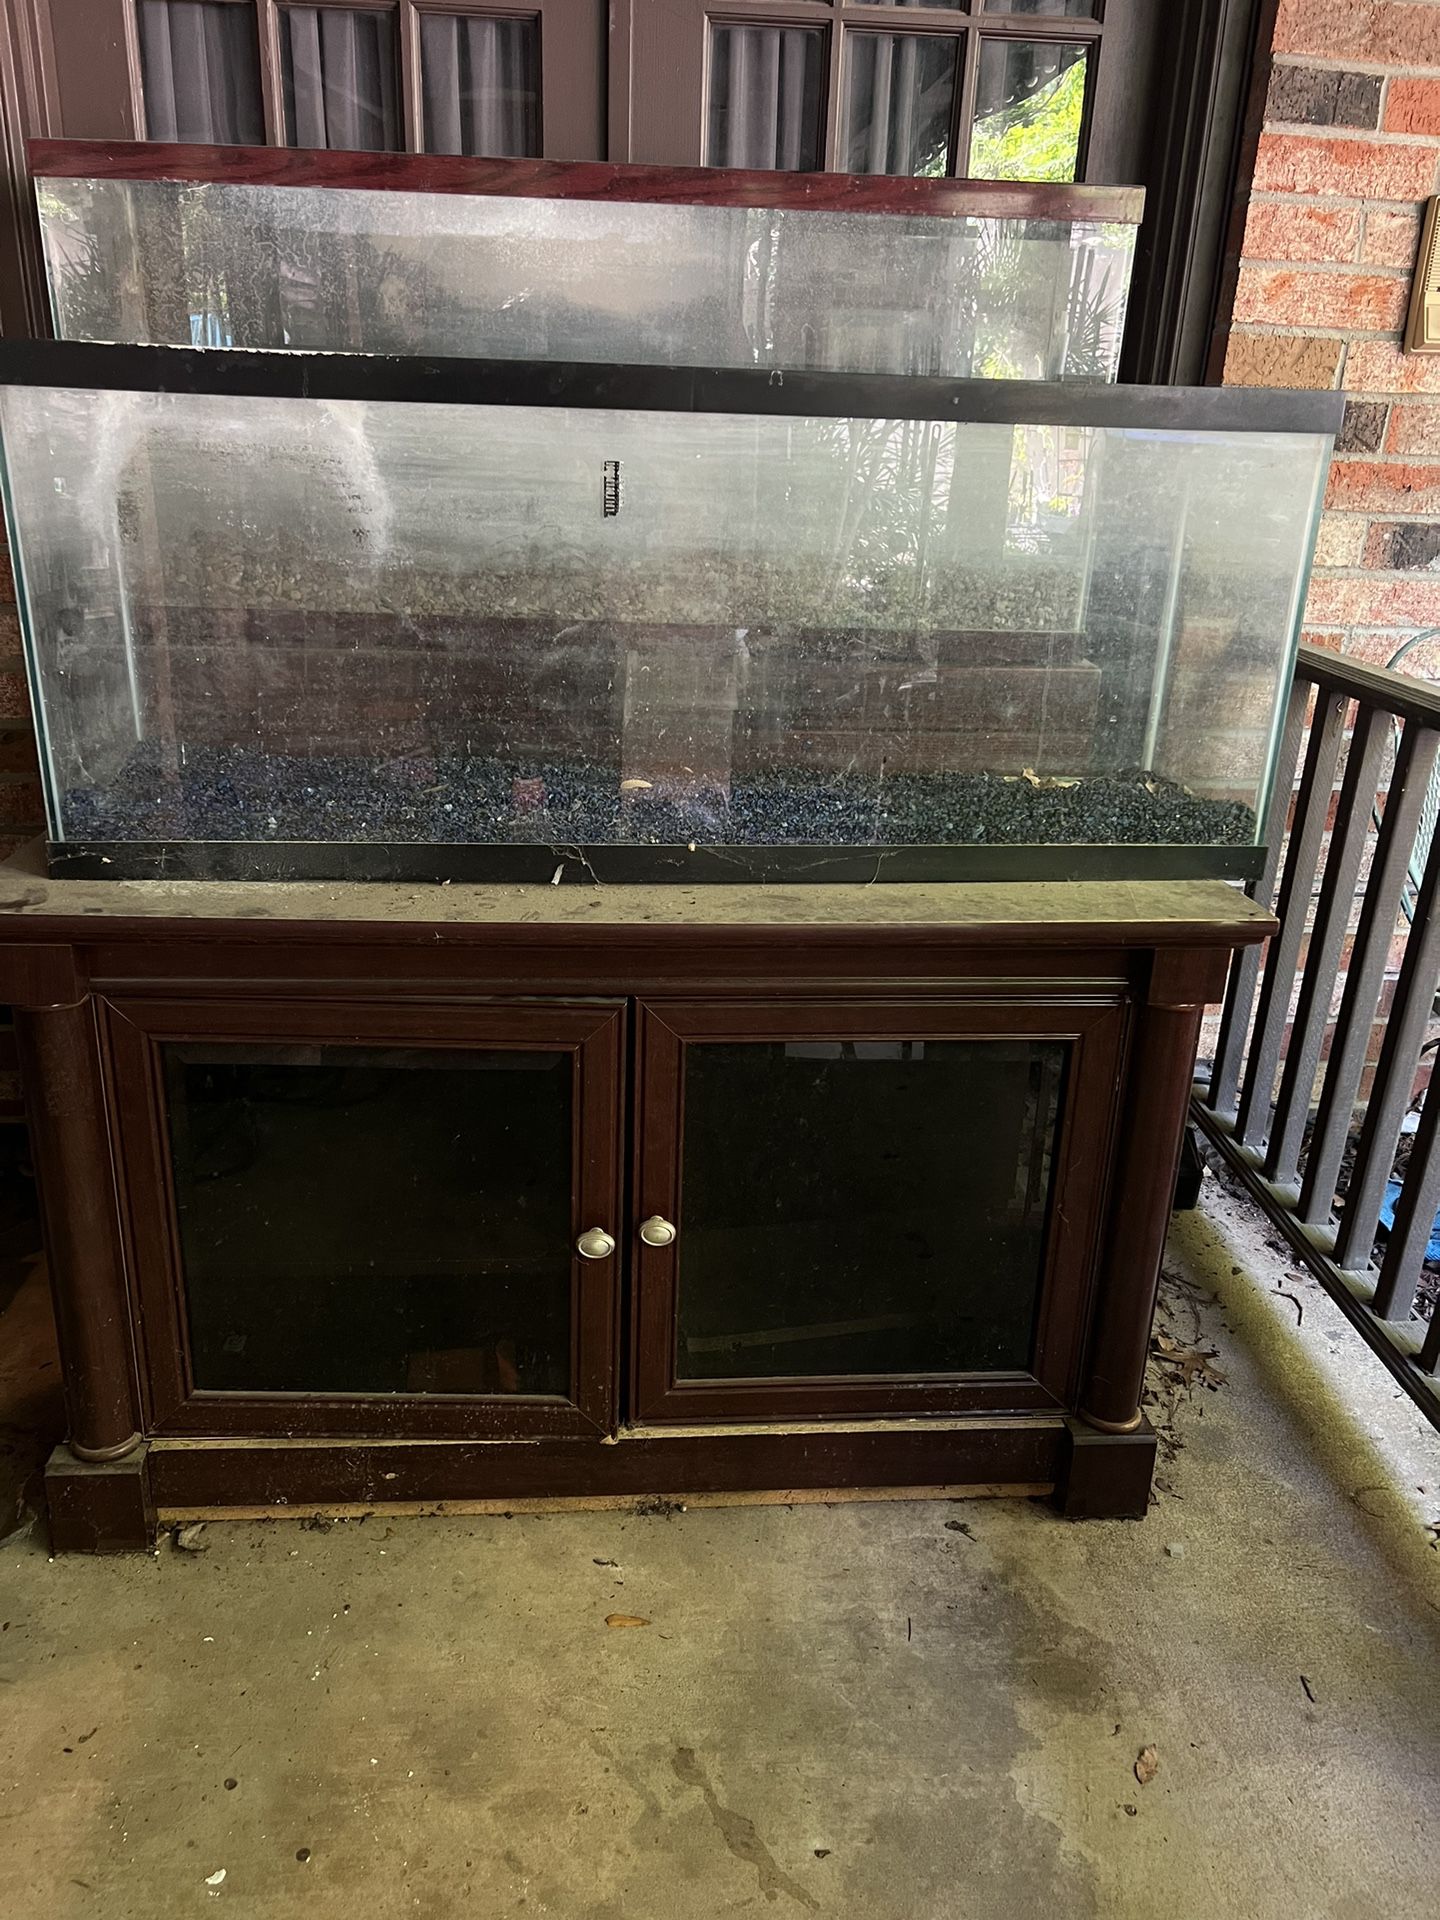 Aquarium With A Stand.   FREE.  